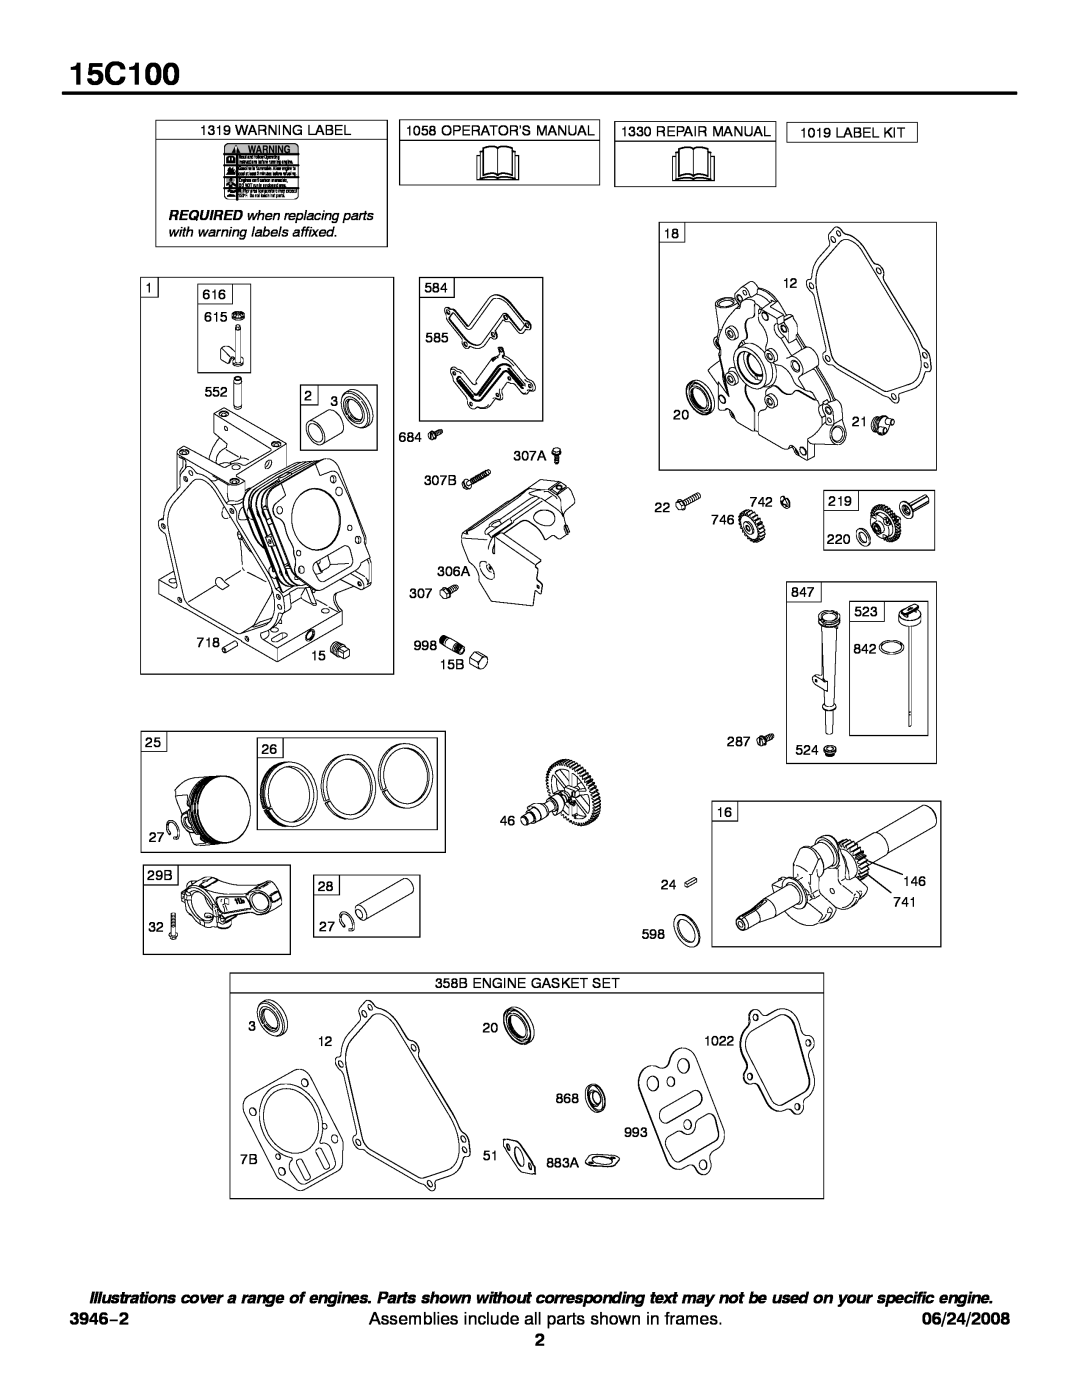 Briggs & Stratton 15C100 service manual 3946−2, Assemblies include all parts shown in frames, 06/24/2008 